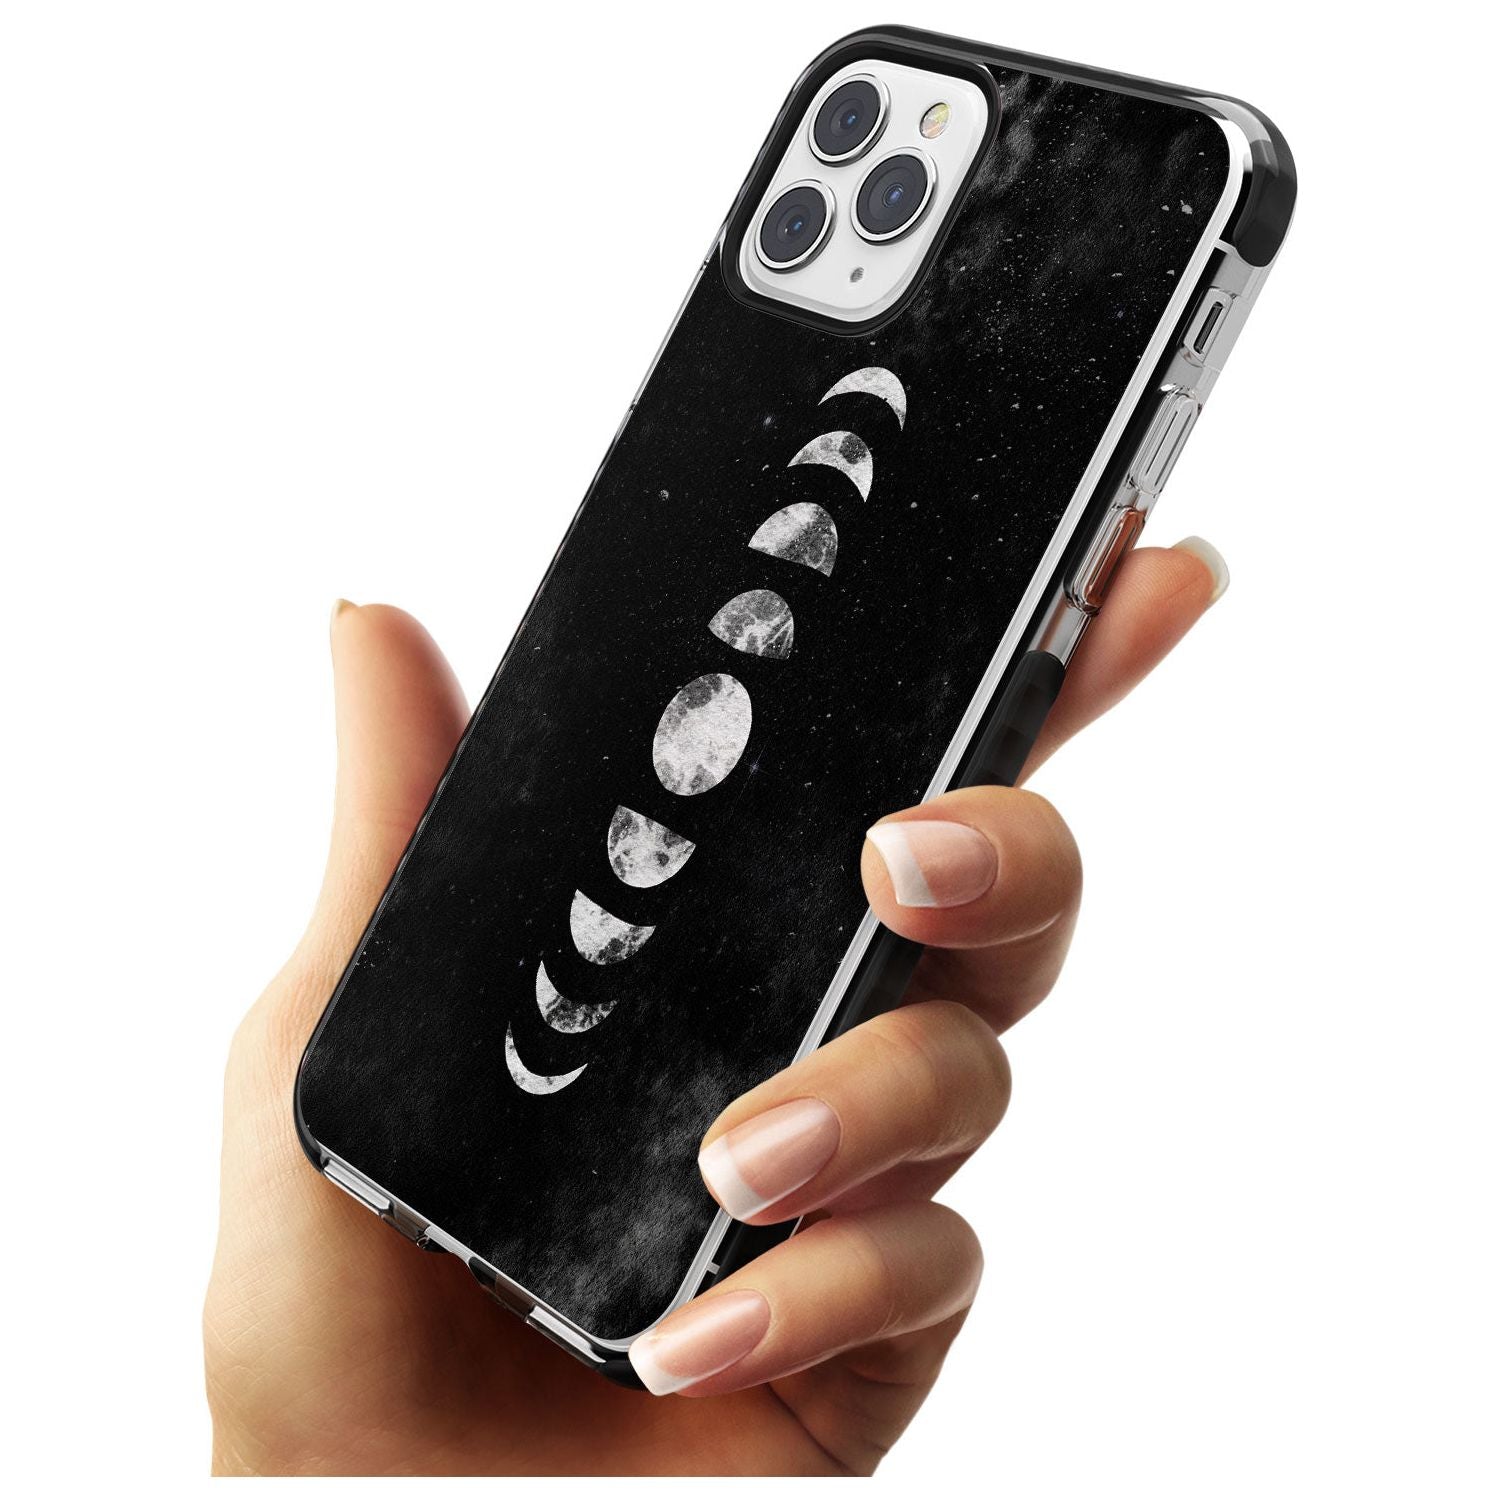 Watercolour Moon Phases Black Impact Phone Case for iPhone 11 Pro Max